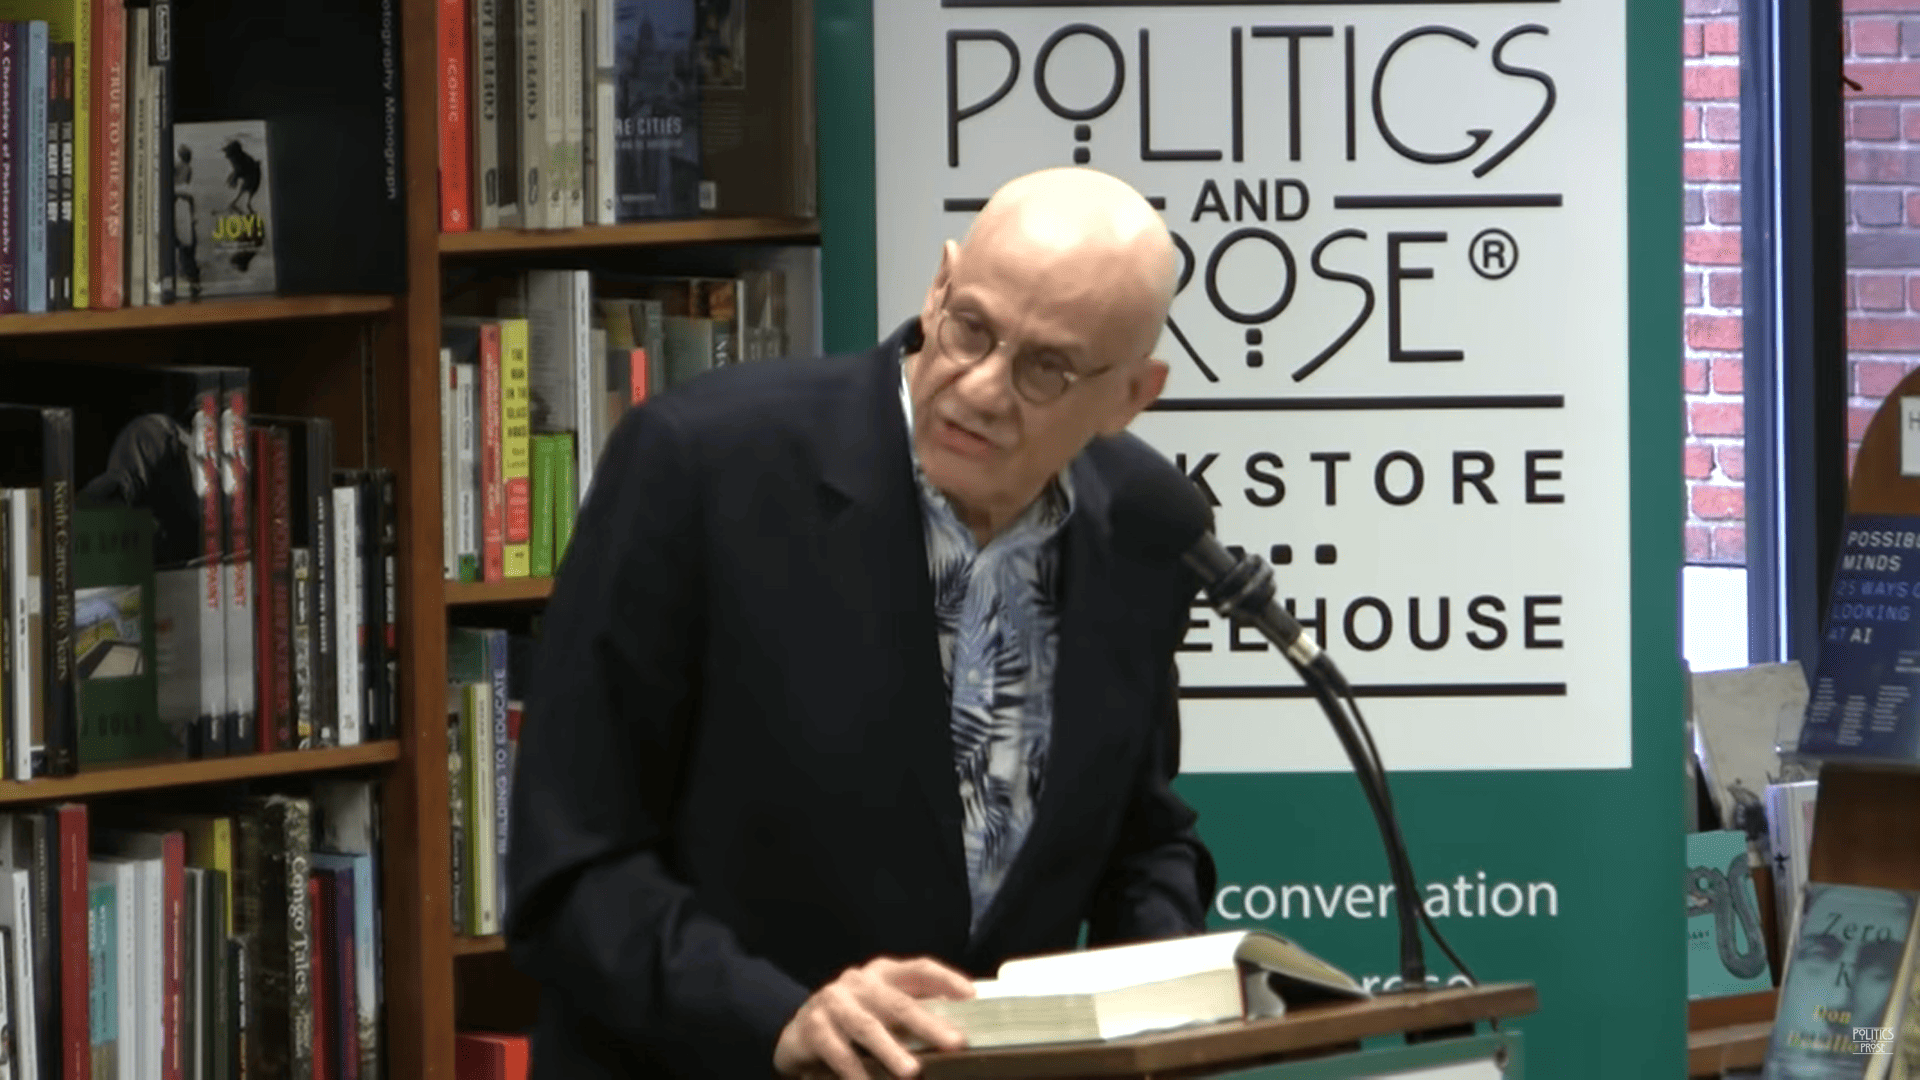 James Ellroy, a light-skinned man with glasses, giving a talk.